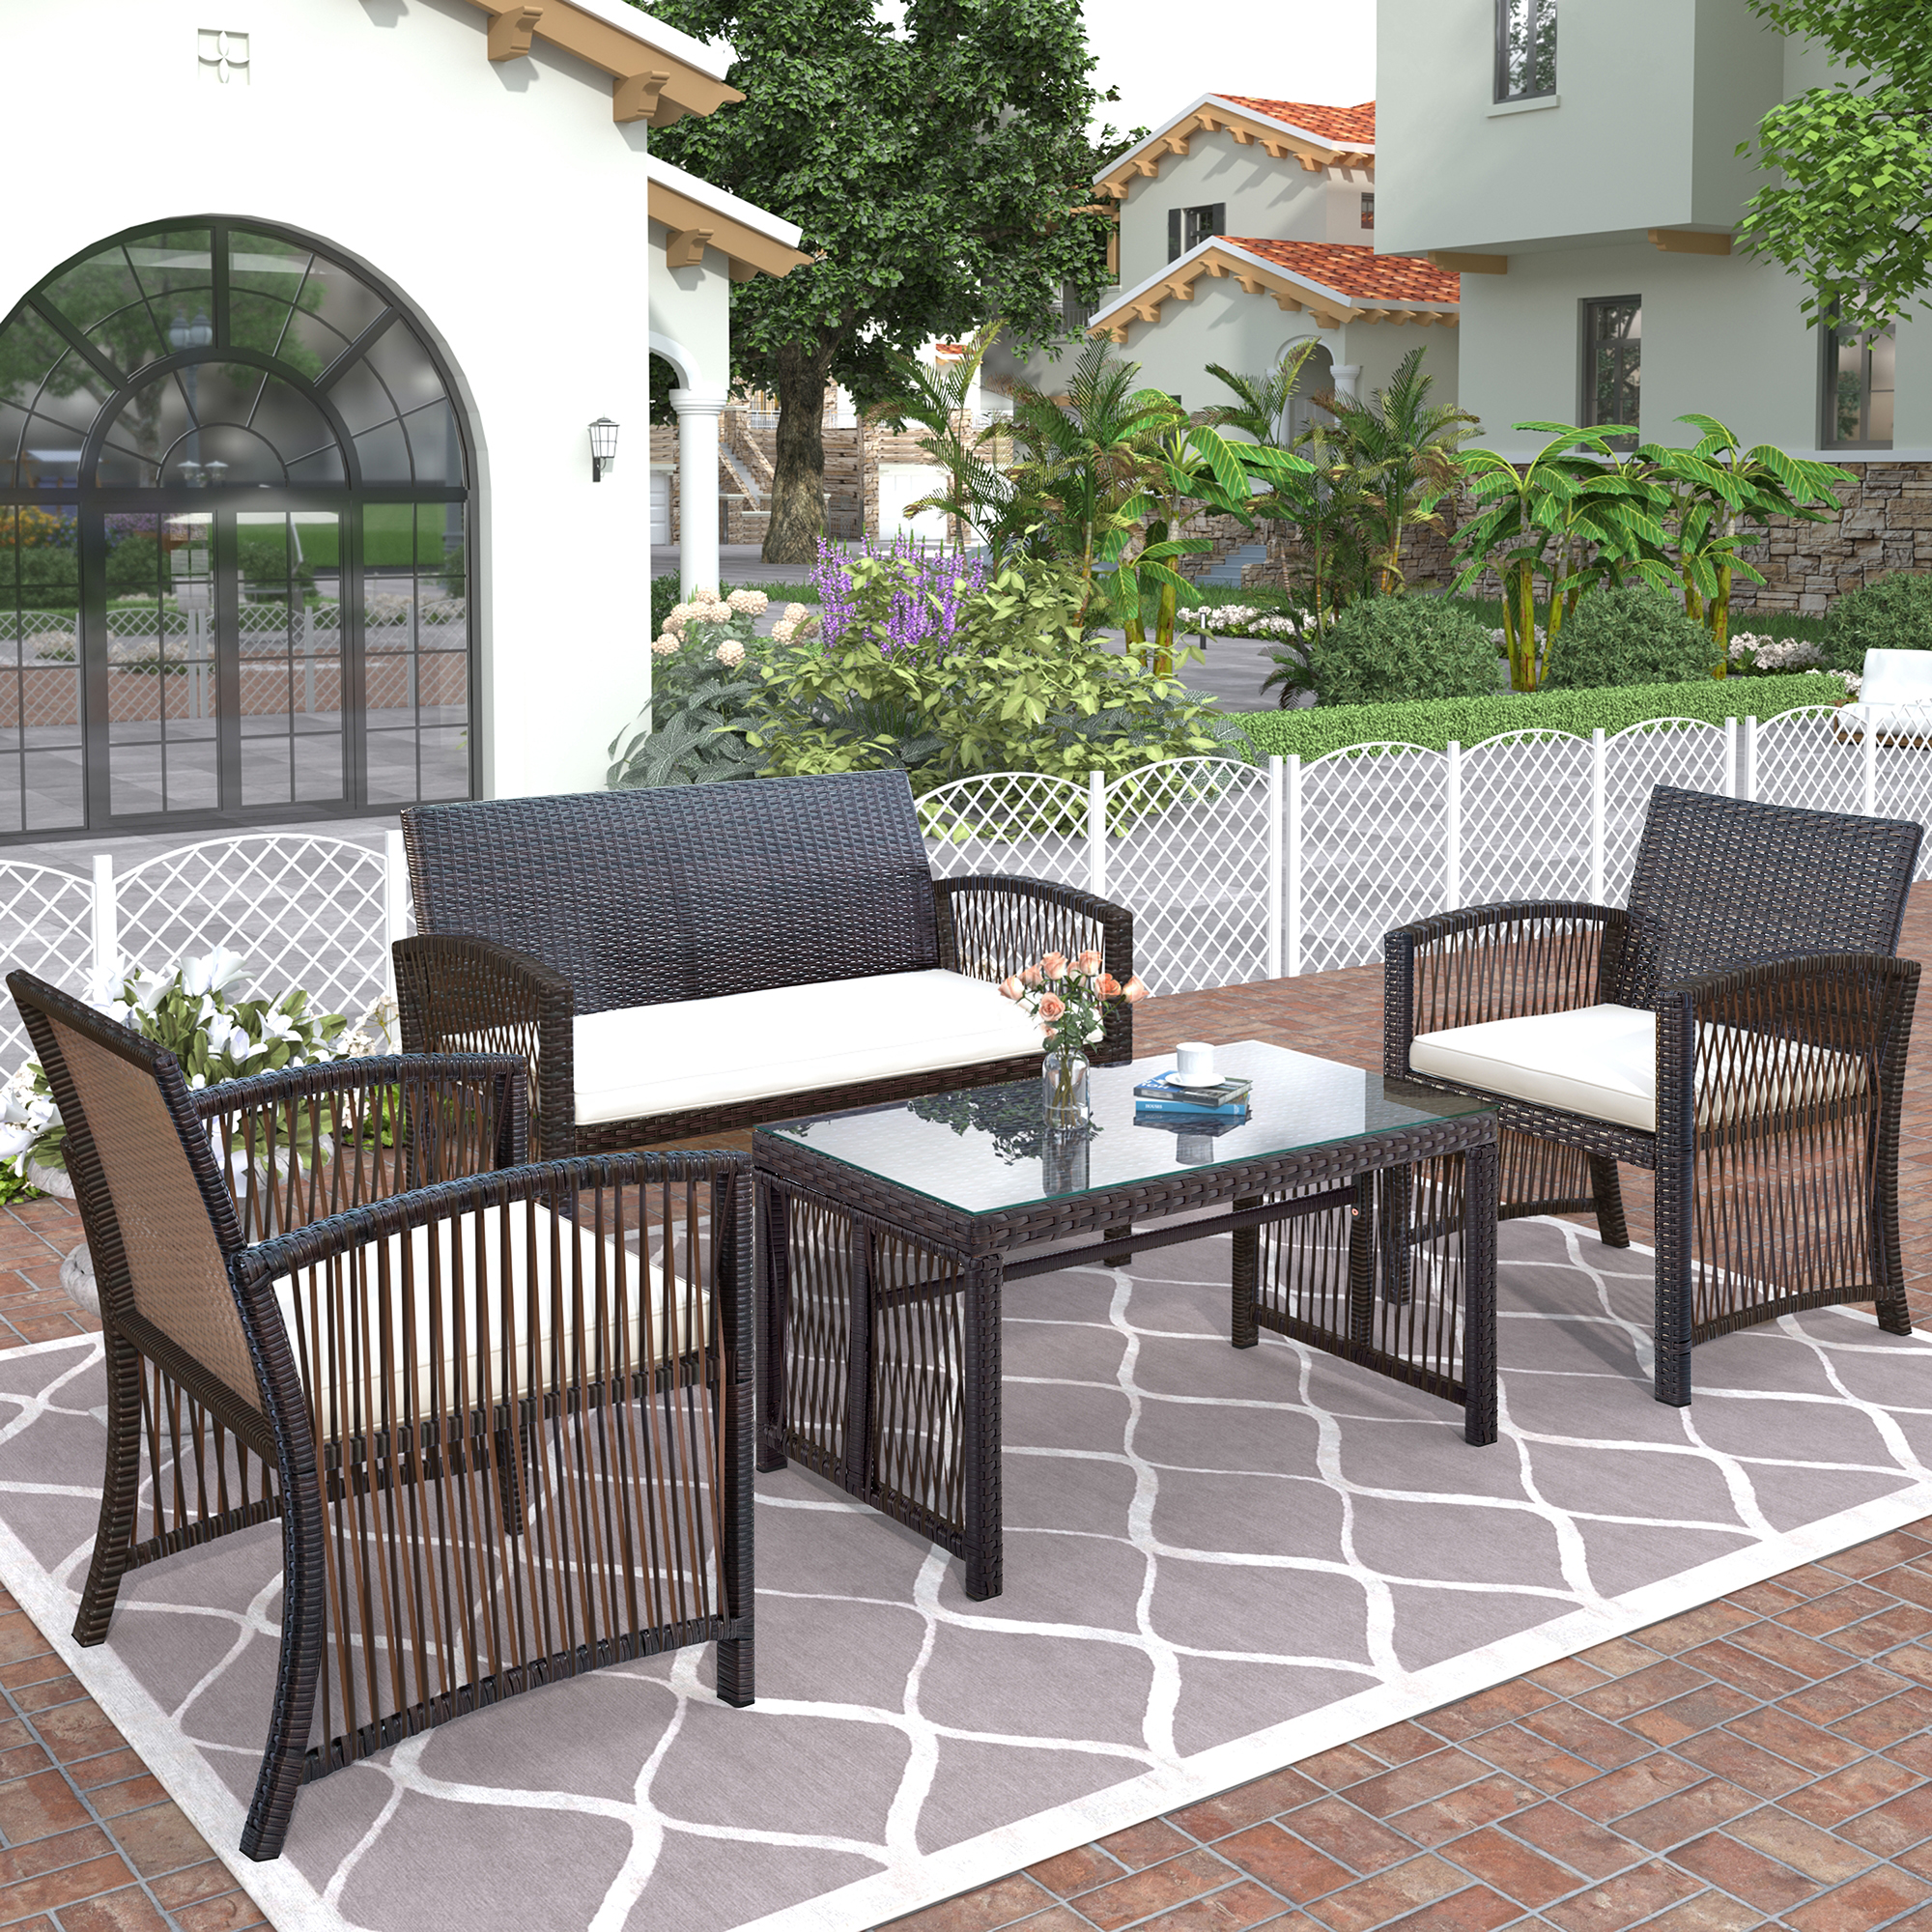 4-Piece Patio Furniture Sets in Patio & Garden, Outdoor Wicker Sofa PE Rattan Chair Garden Conversation Set, Patio Set for Backyard with 2 Single Sofa, 1 Loveseat, Tempered Glass Table, Q16554 - image 3 of 13